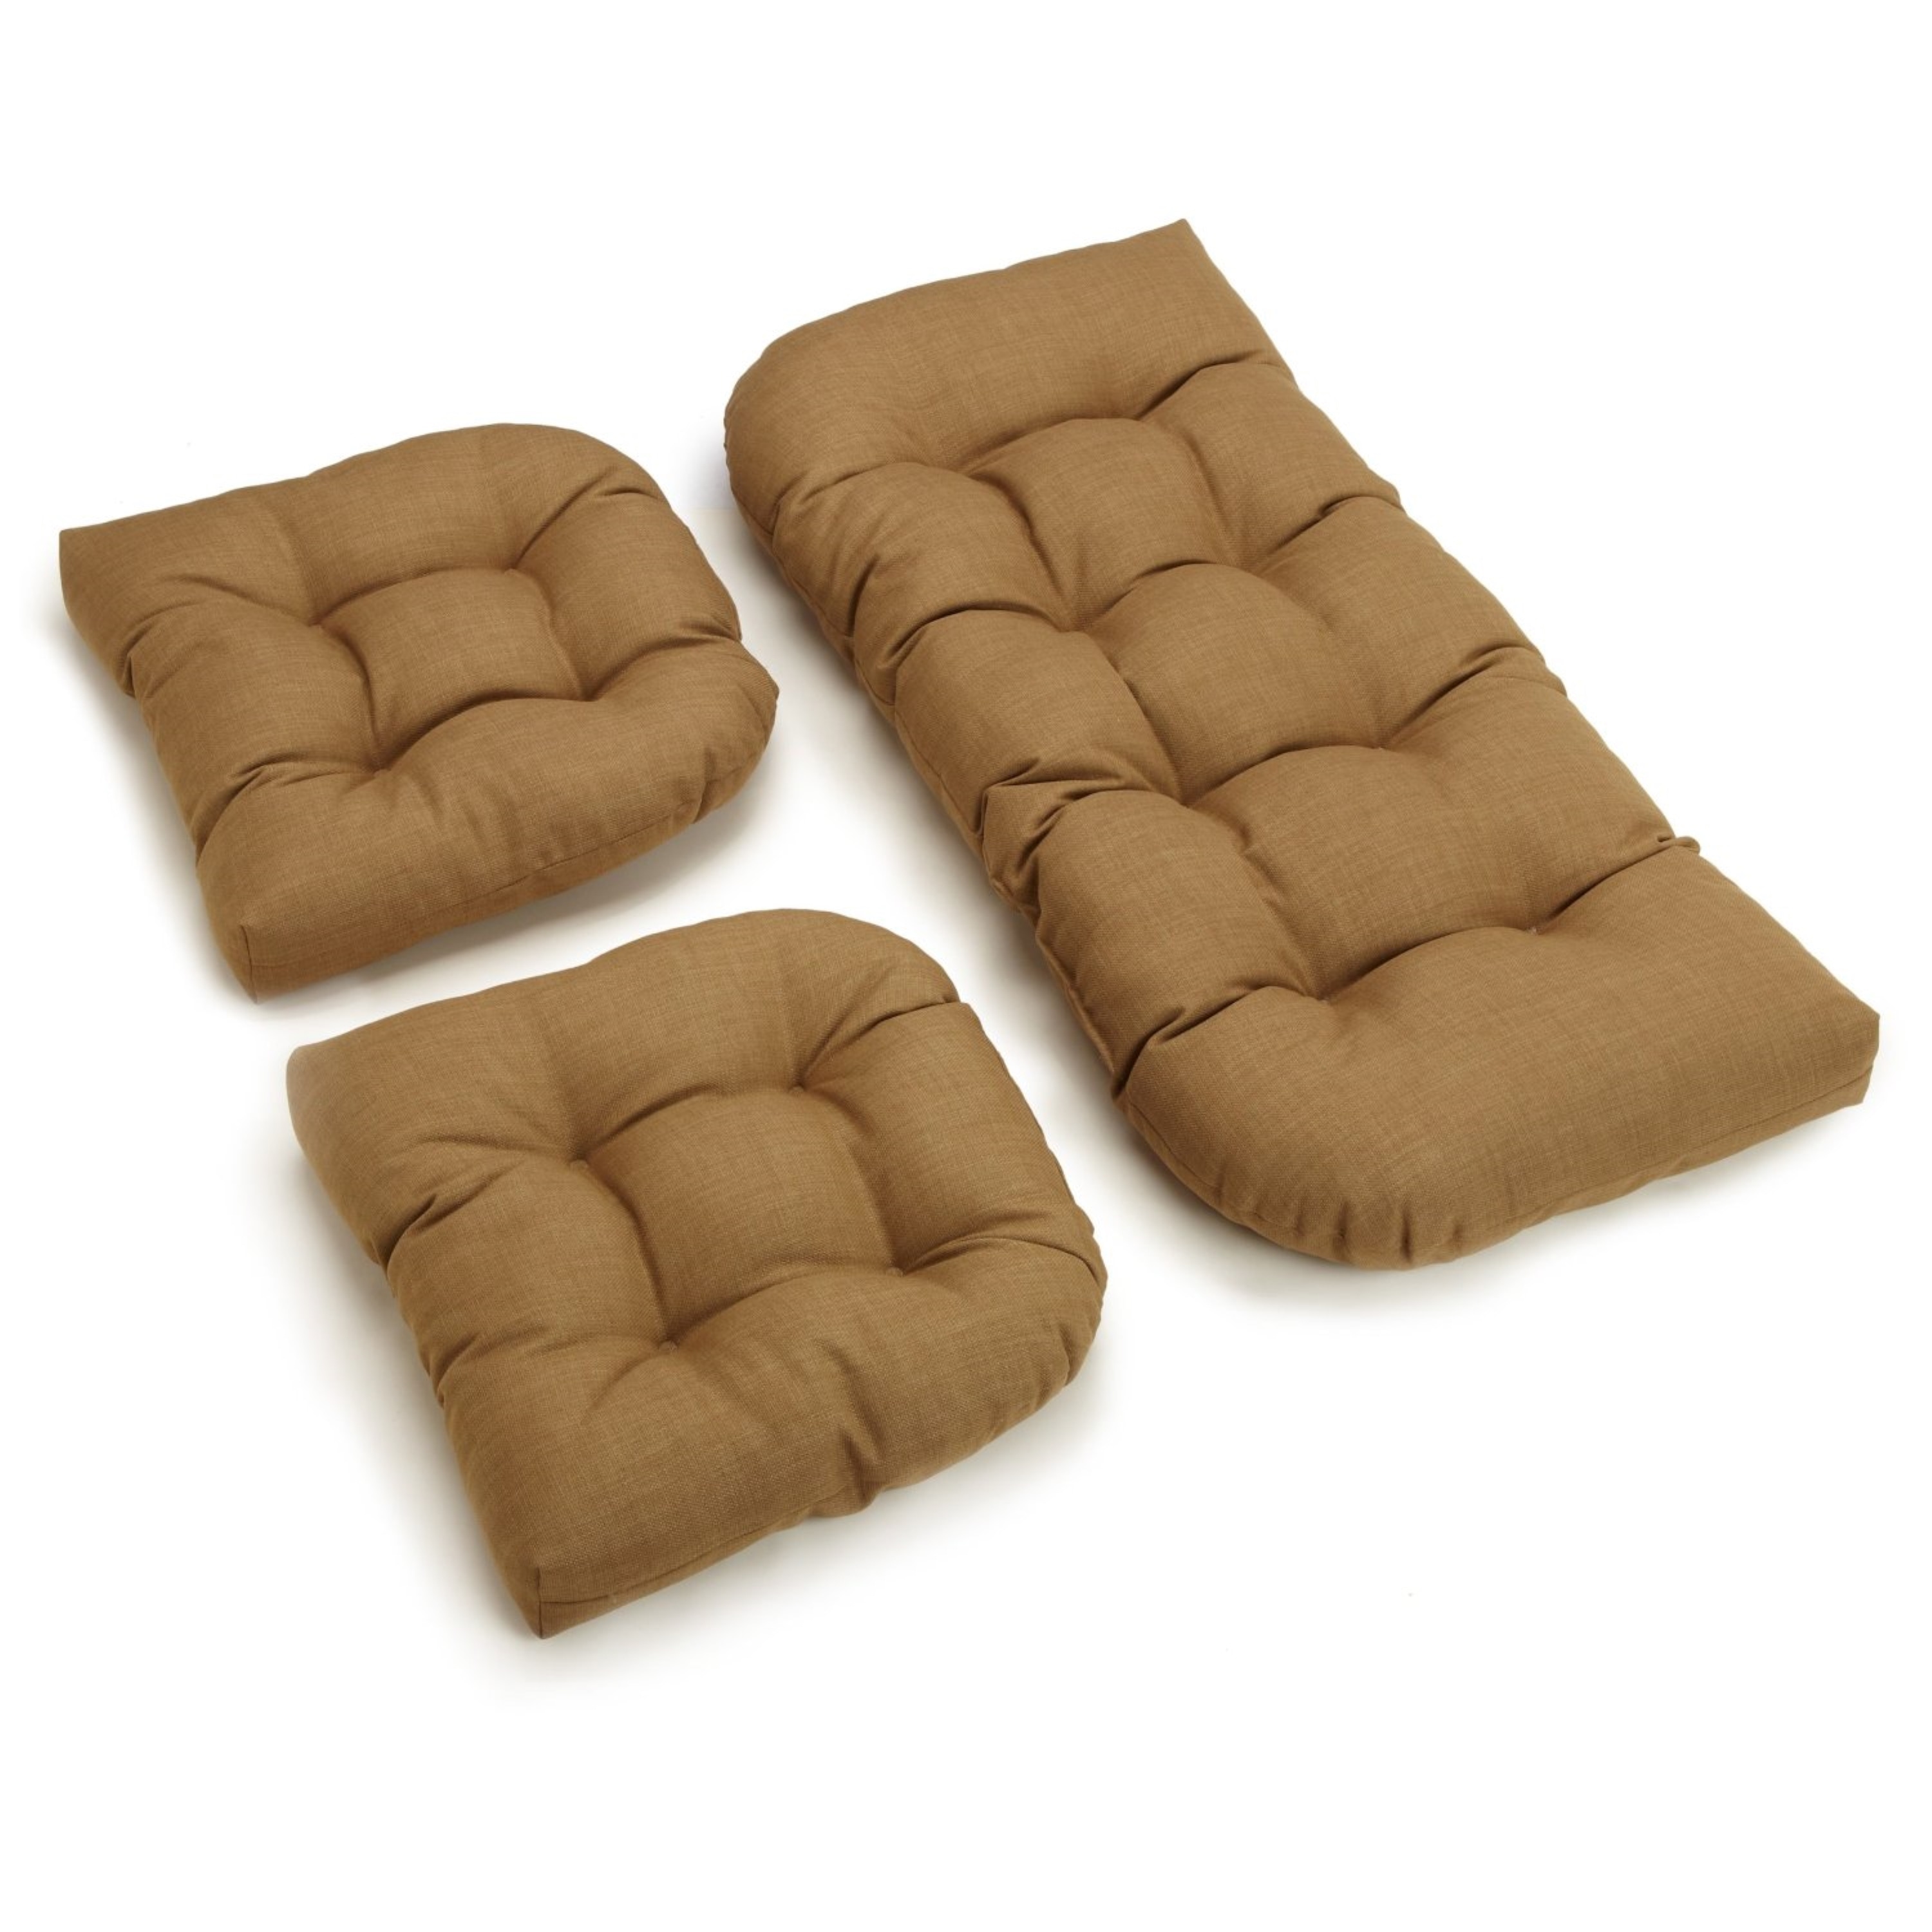 https://ak1.ostkcdn.com/images/products/is/images/direct/9ee39ef8b19d85680791e4c6d2bfef6656b799f5/Tufted-Outdoor-Settee-Cushion-Set-%28Set-of-3%29.jpg